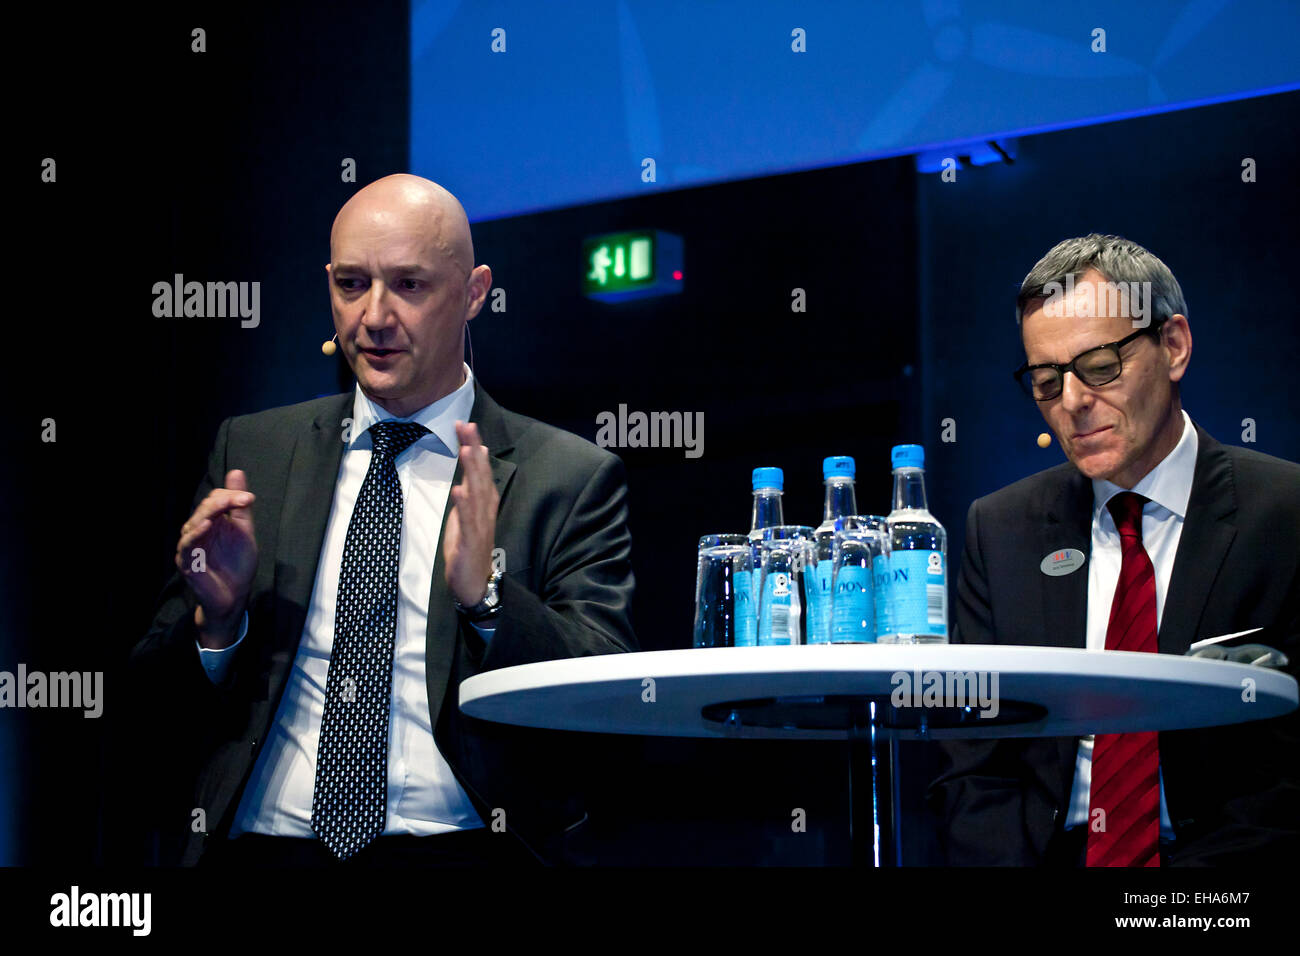 CEO in MHI Vestas Offshore Wind, Mr Claus Hviid Christensen (photo, left) , and Mr. Jens Tommerup (photo, right), discuss at the podium at EWEA 2015 conference and exhibition opening ceremony in Copenhagen. The big issue is to achieve cost reduction so wind energy can compete with fossil energy Credit:  OJPHOTOS/Alamy Live News Stock Photo